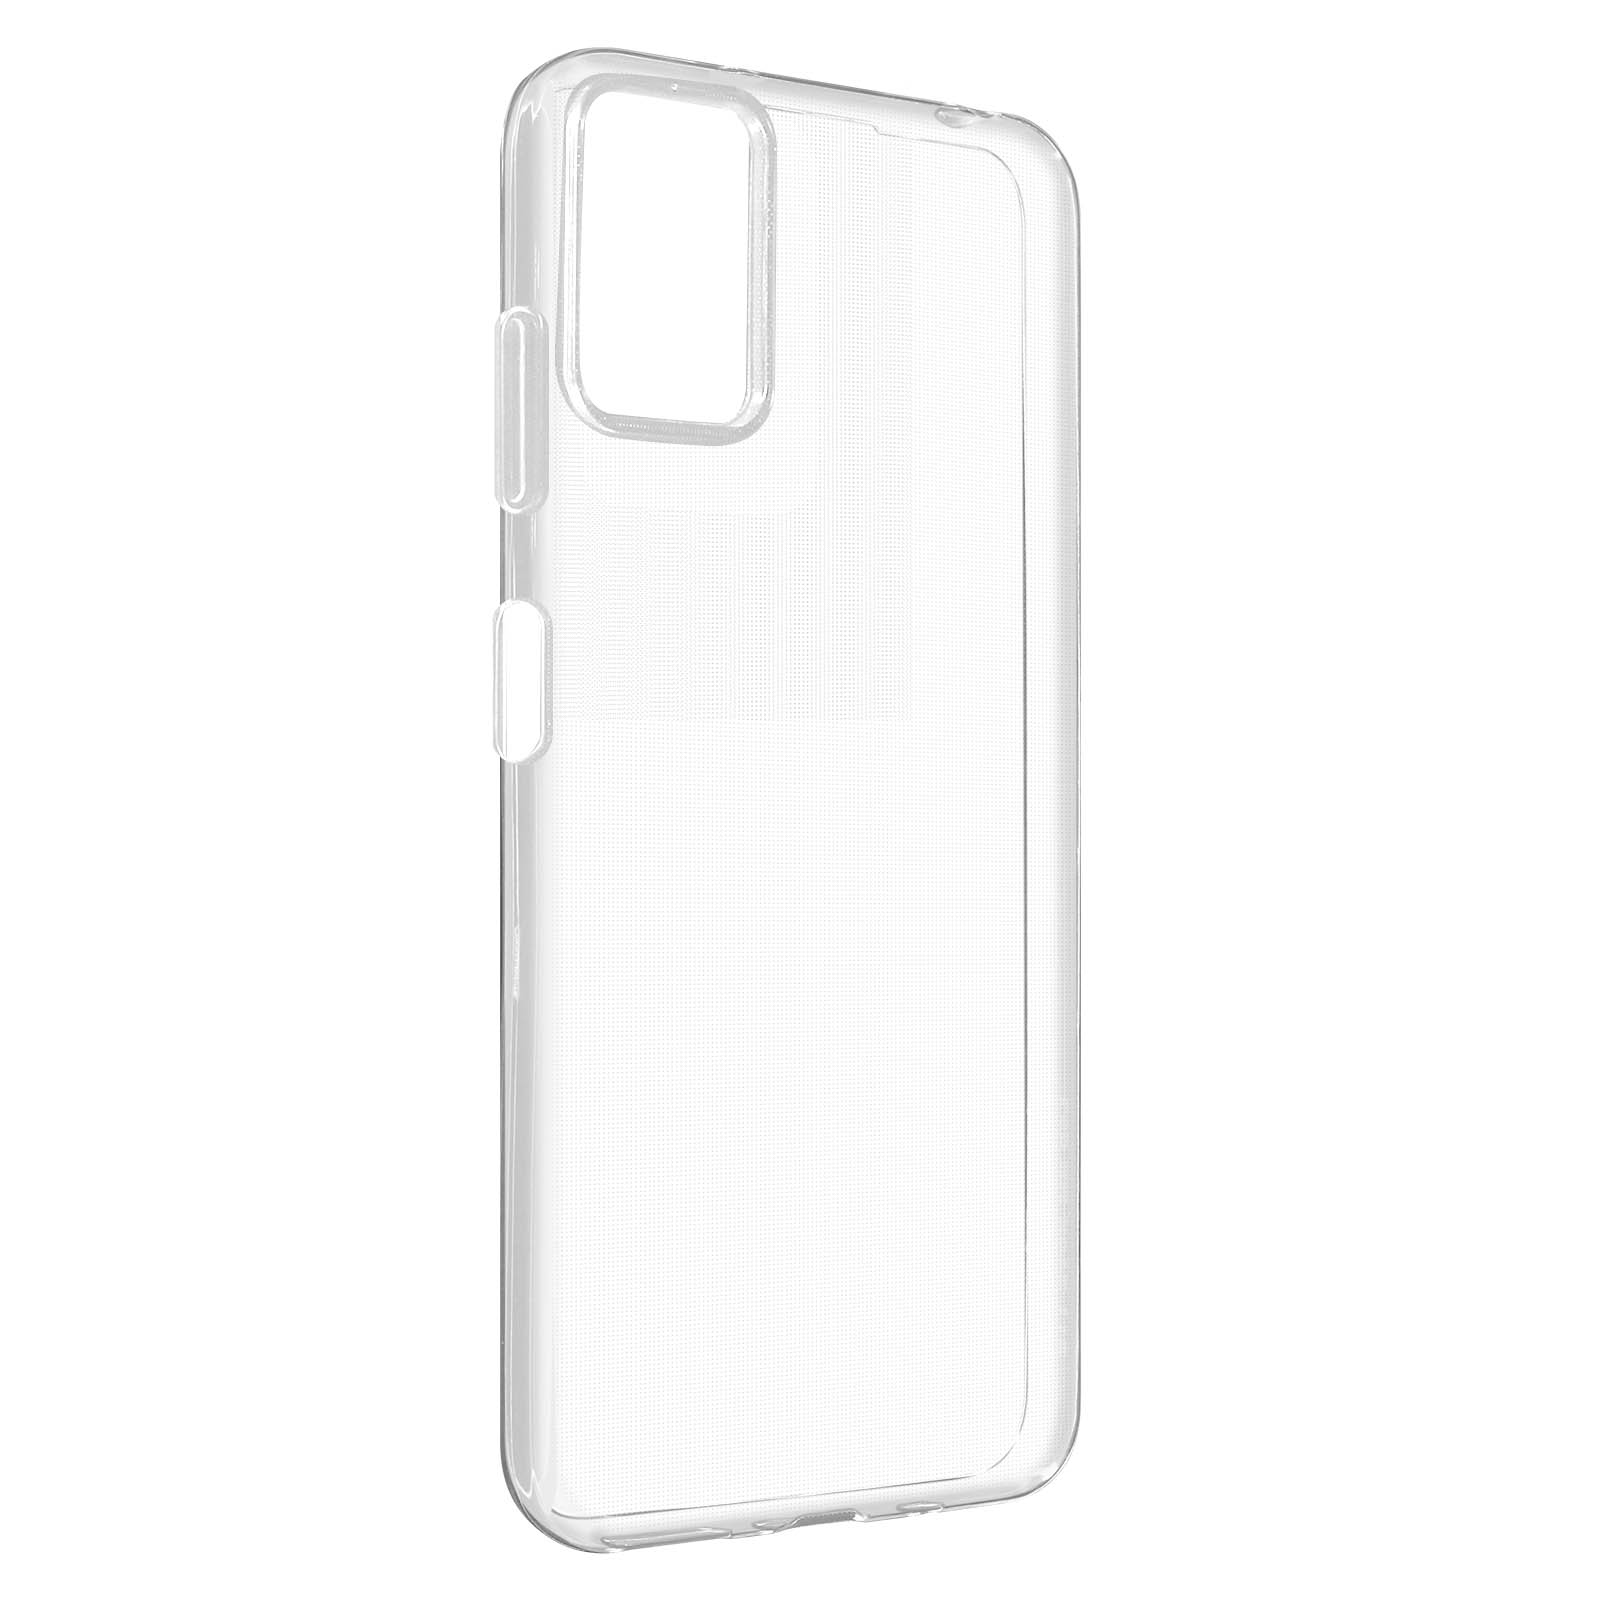 Series, G72, Transparent Cover TACTICAL Motorola, Backcover, Clear Moto